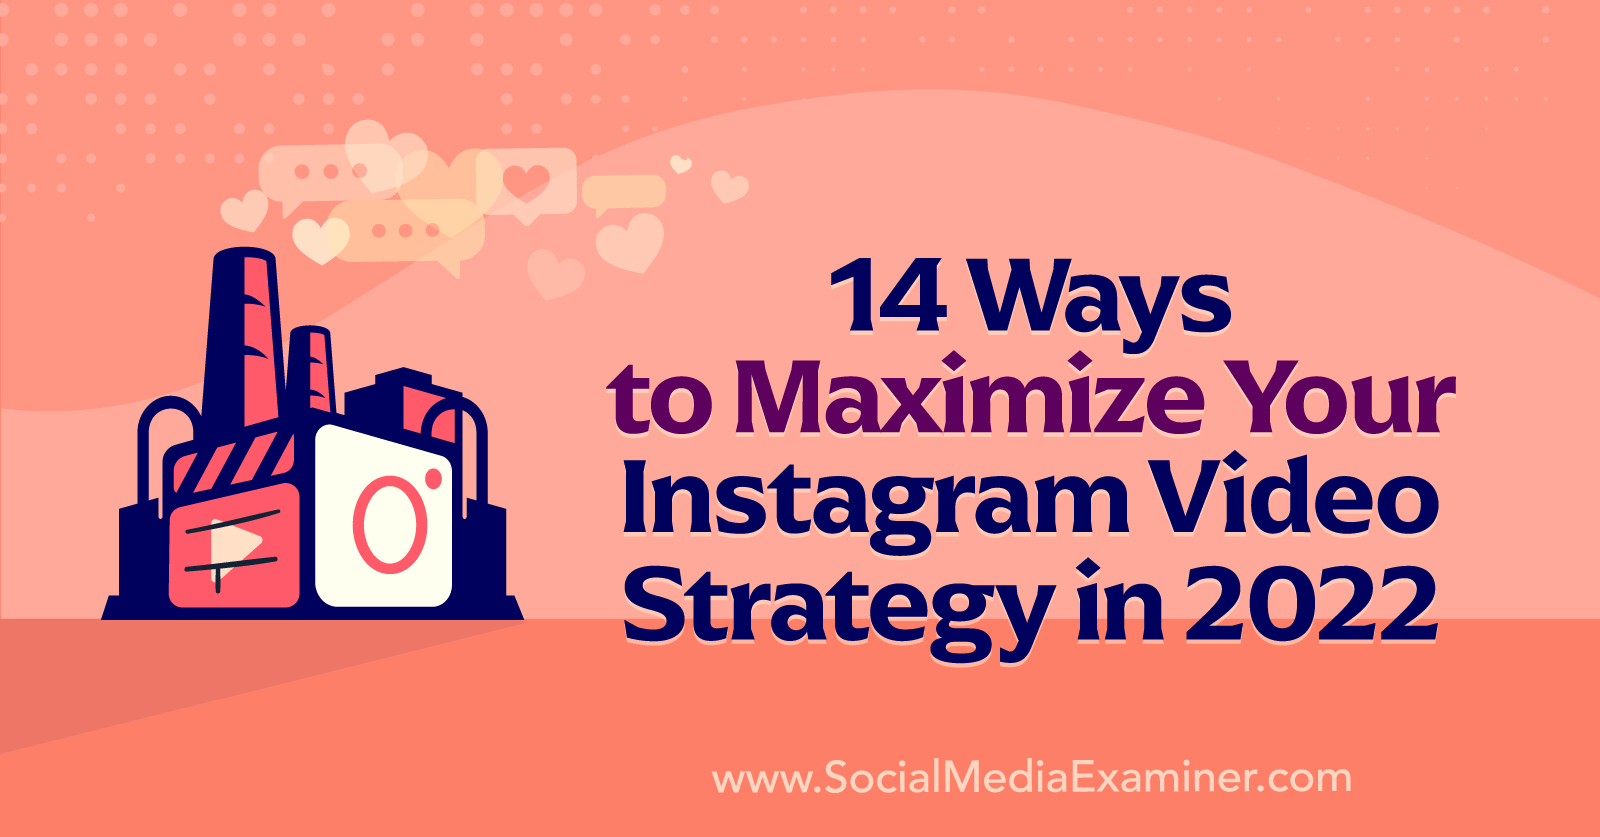 14 Ways to Maximize Your Instagram Video Strategy in 2022 by Anna Sonnenberg on Social Media Examiner.